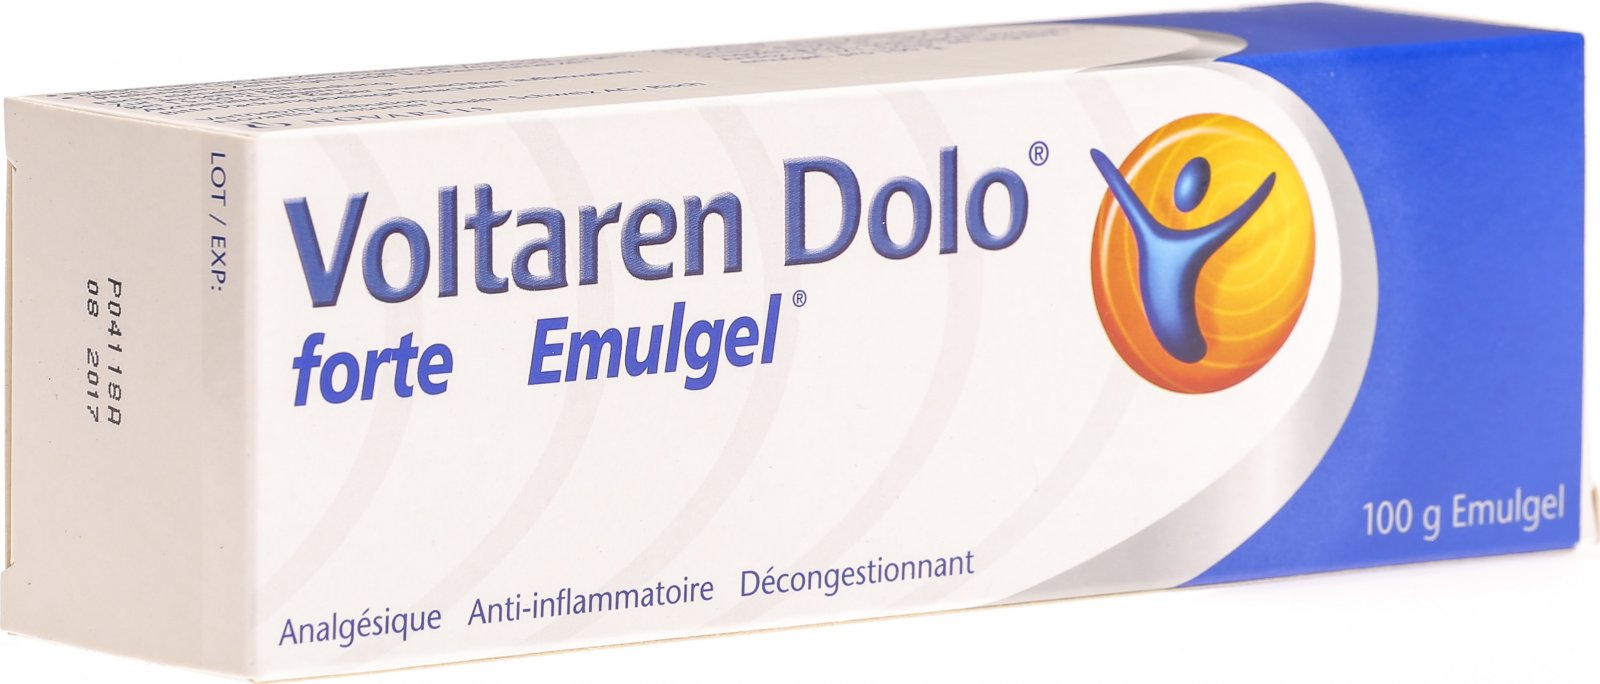 View larger picture of Voltaren Dolo Forte Emulgel 100g.